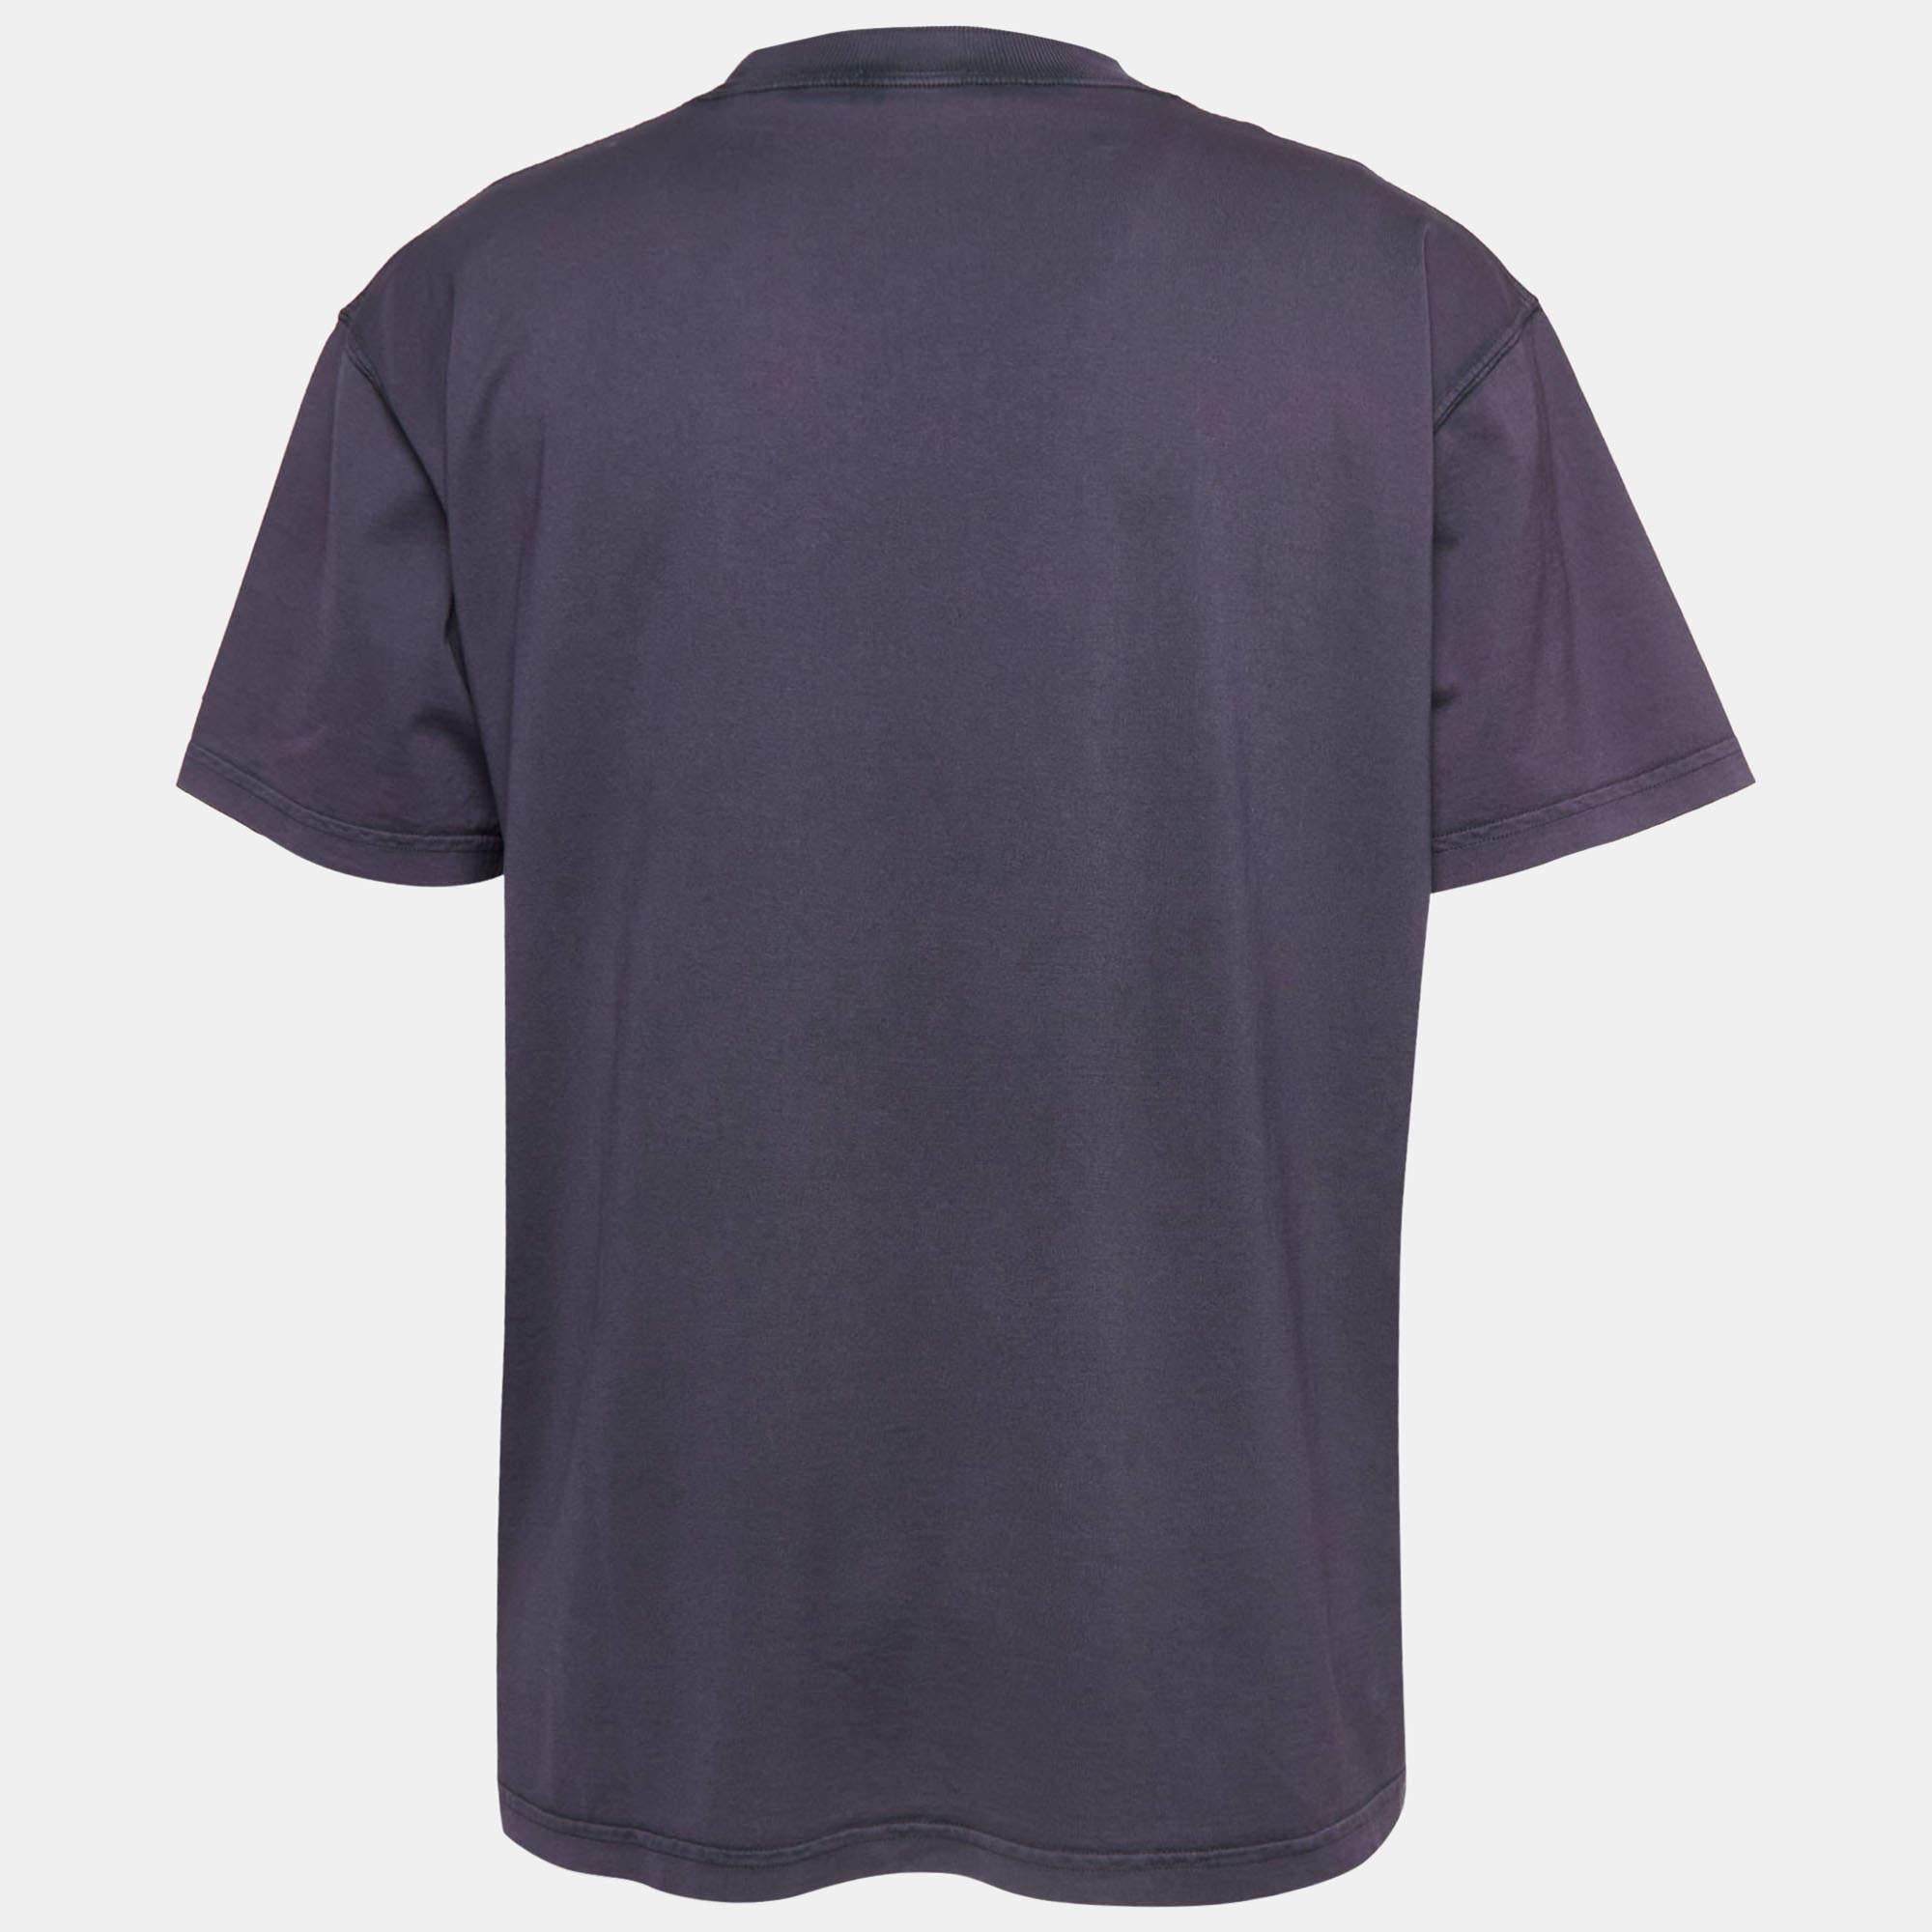 Choose all-day comfort with this Dior cotton T-shirt. Beautifully sewn, the men's T-shirt, featuring a crew neckline and short sleeves, guarantees quality and simple style.

